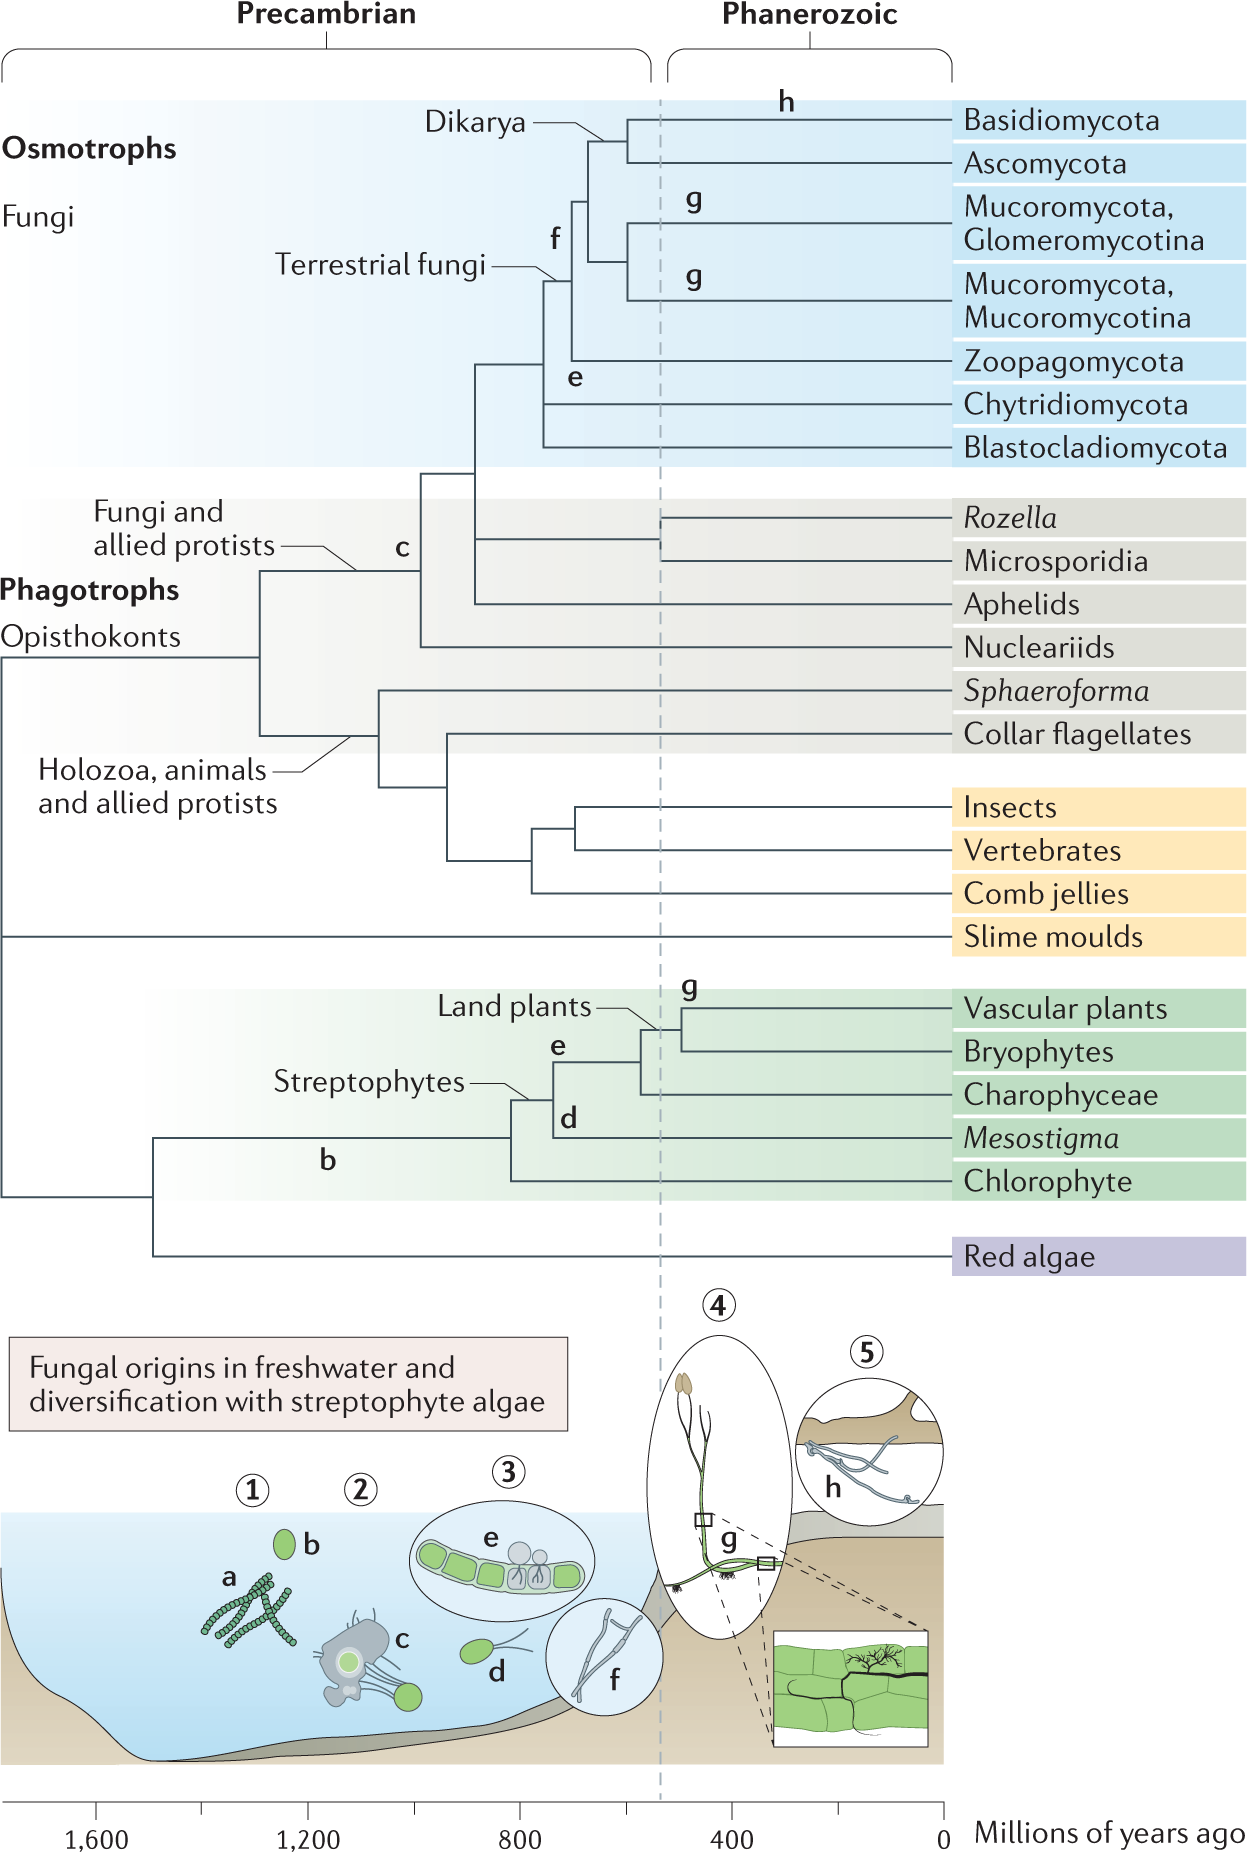 Genomic and fossil windows into the secret lives of the most ancient fungi  | Nature Reviews Microbiology